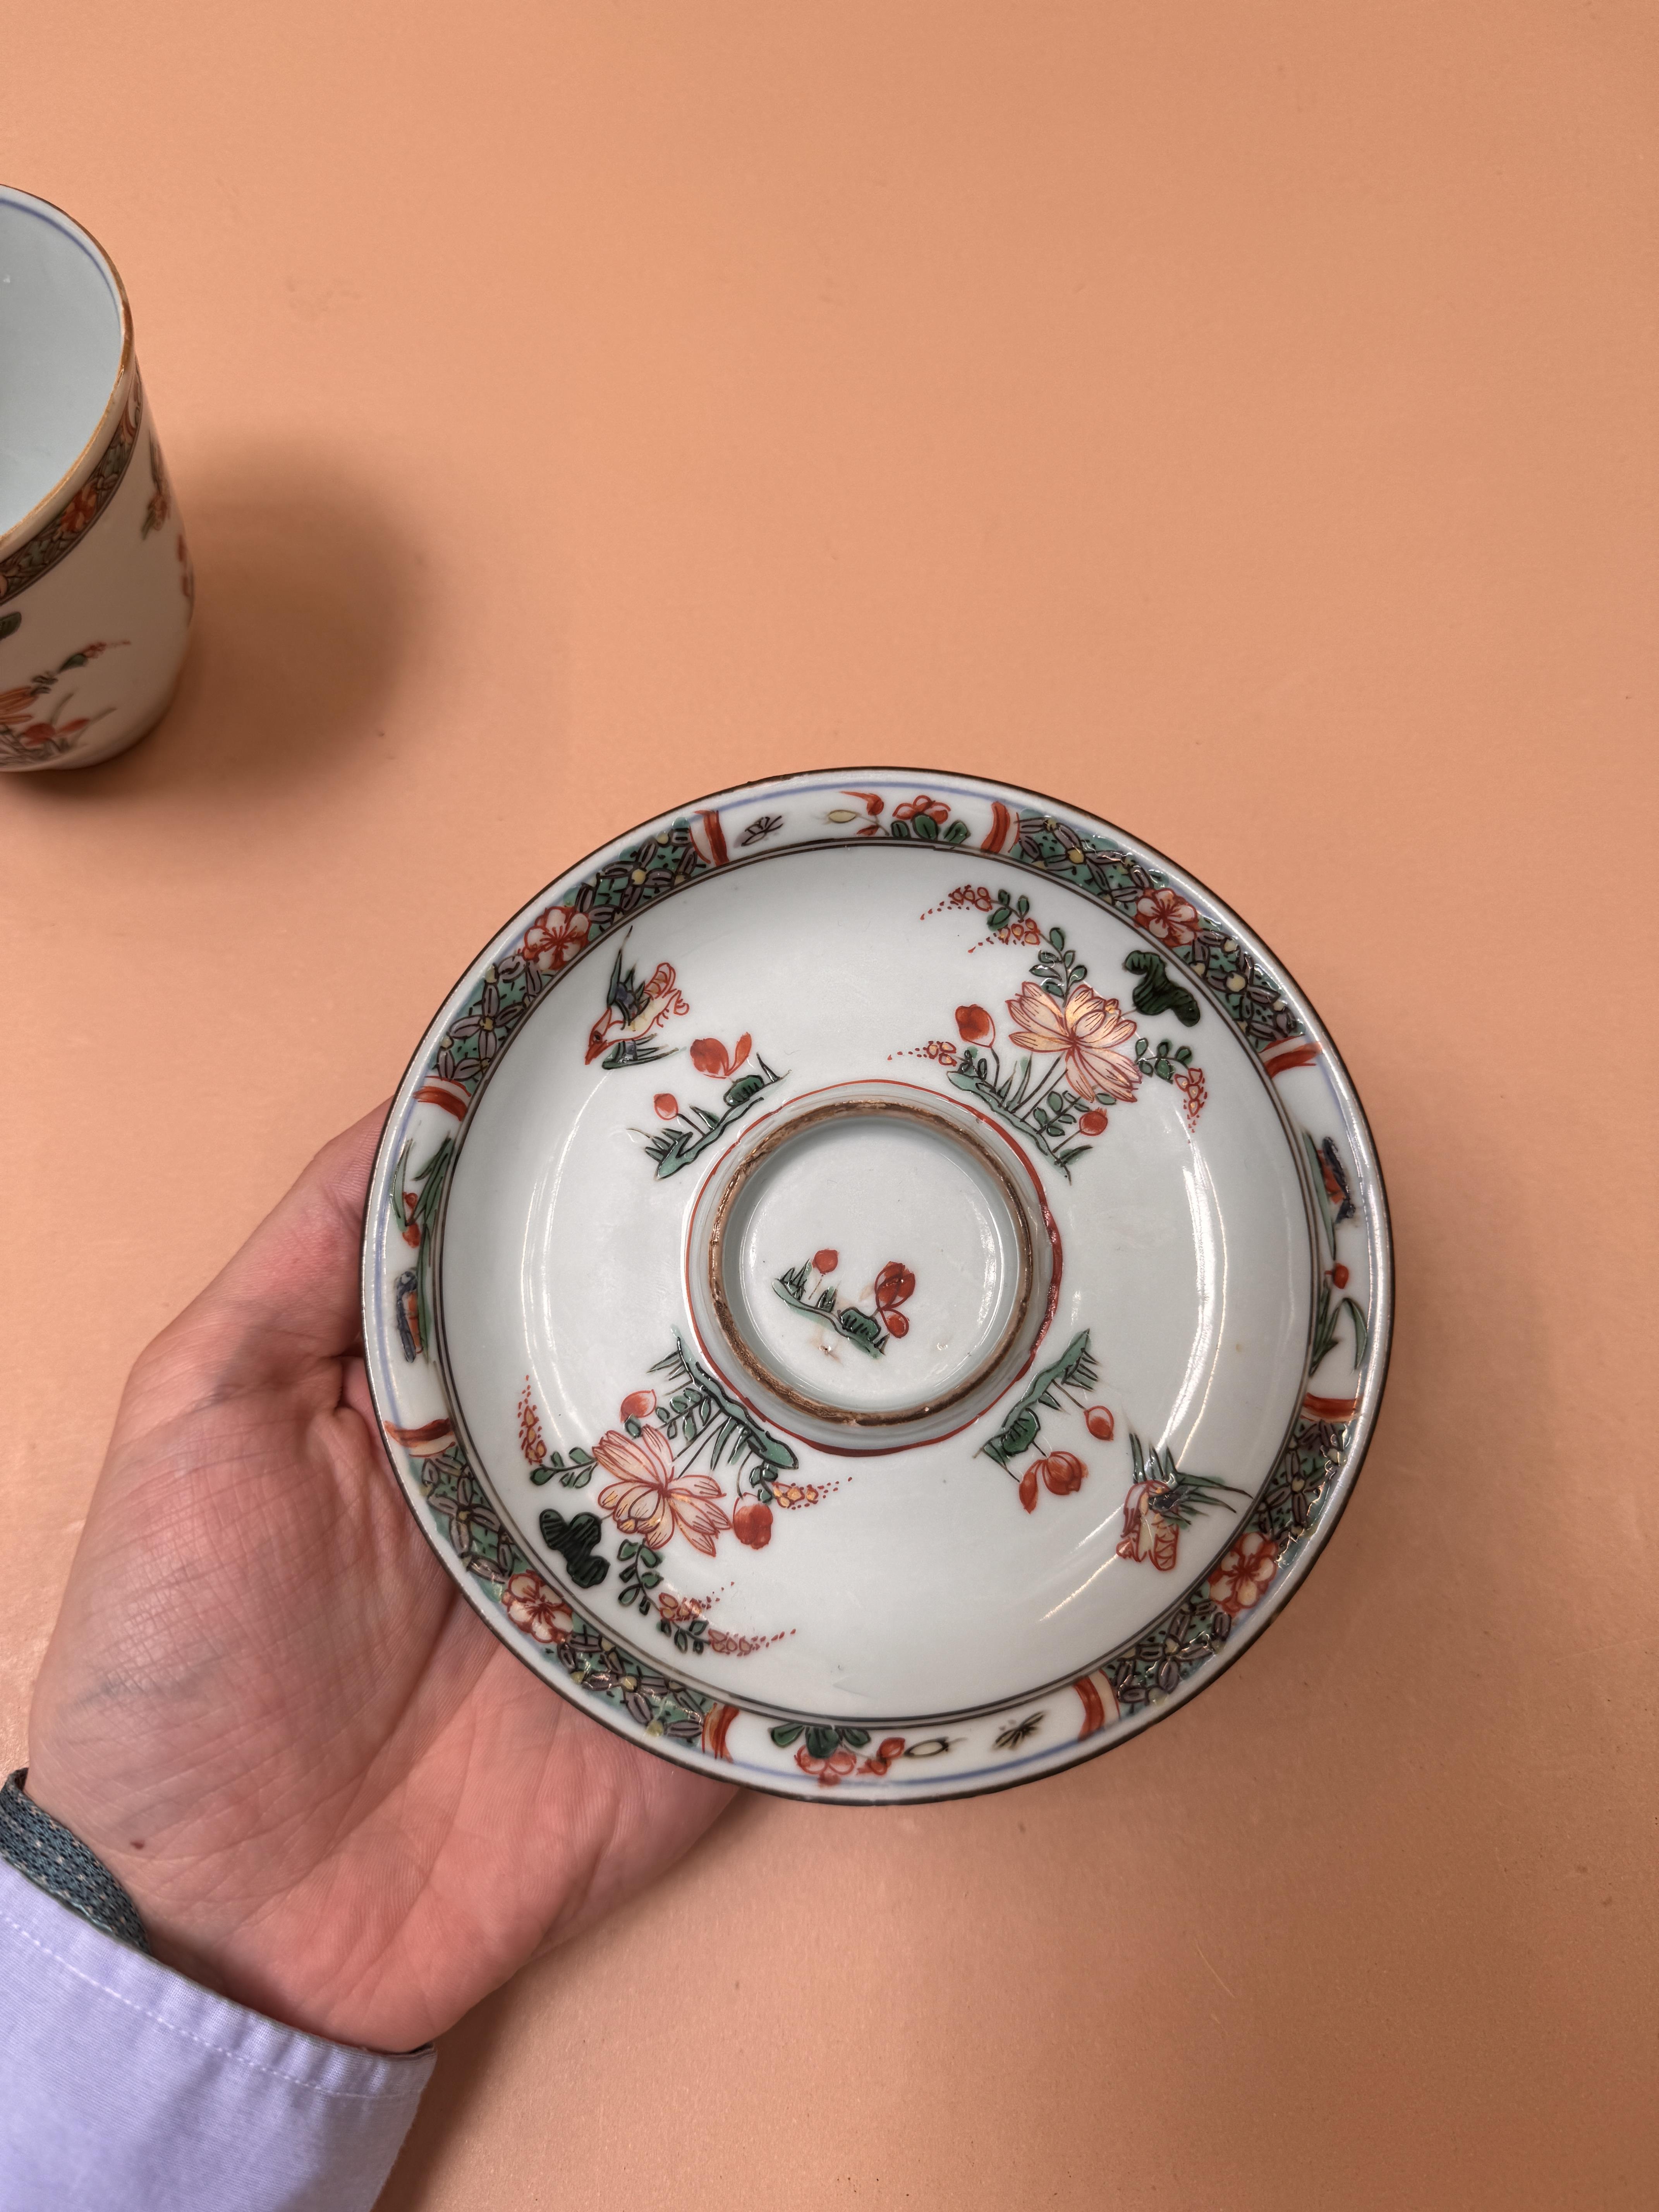 A CHINESE FAMILLE-VERTE CUP AND SAUCER 清康熙 五彩花鳥圖盃連盤 - Image 13 of 18